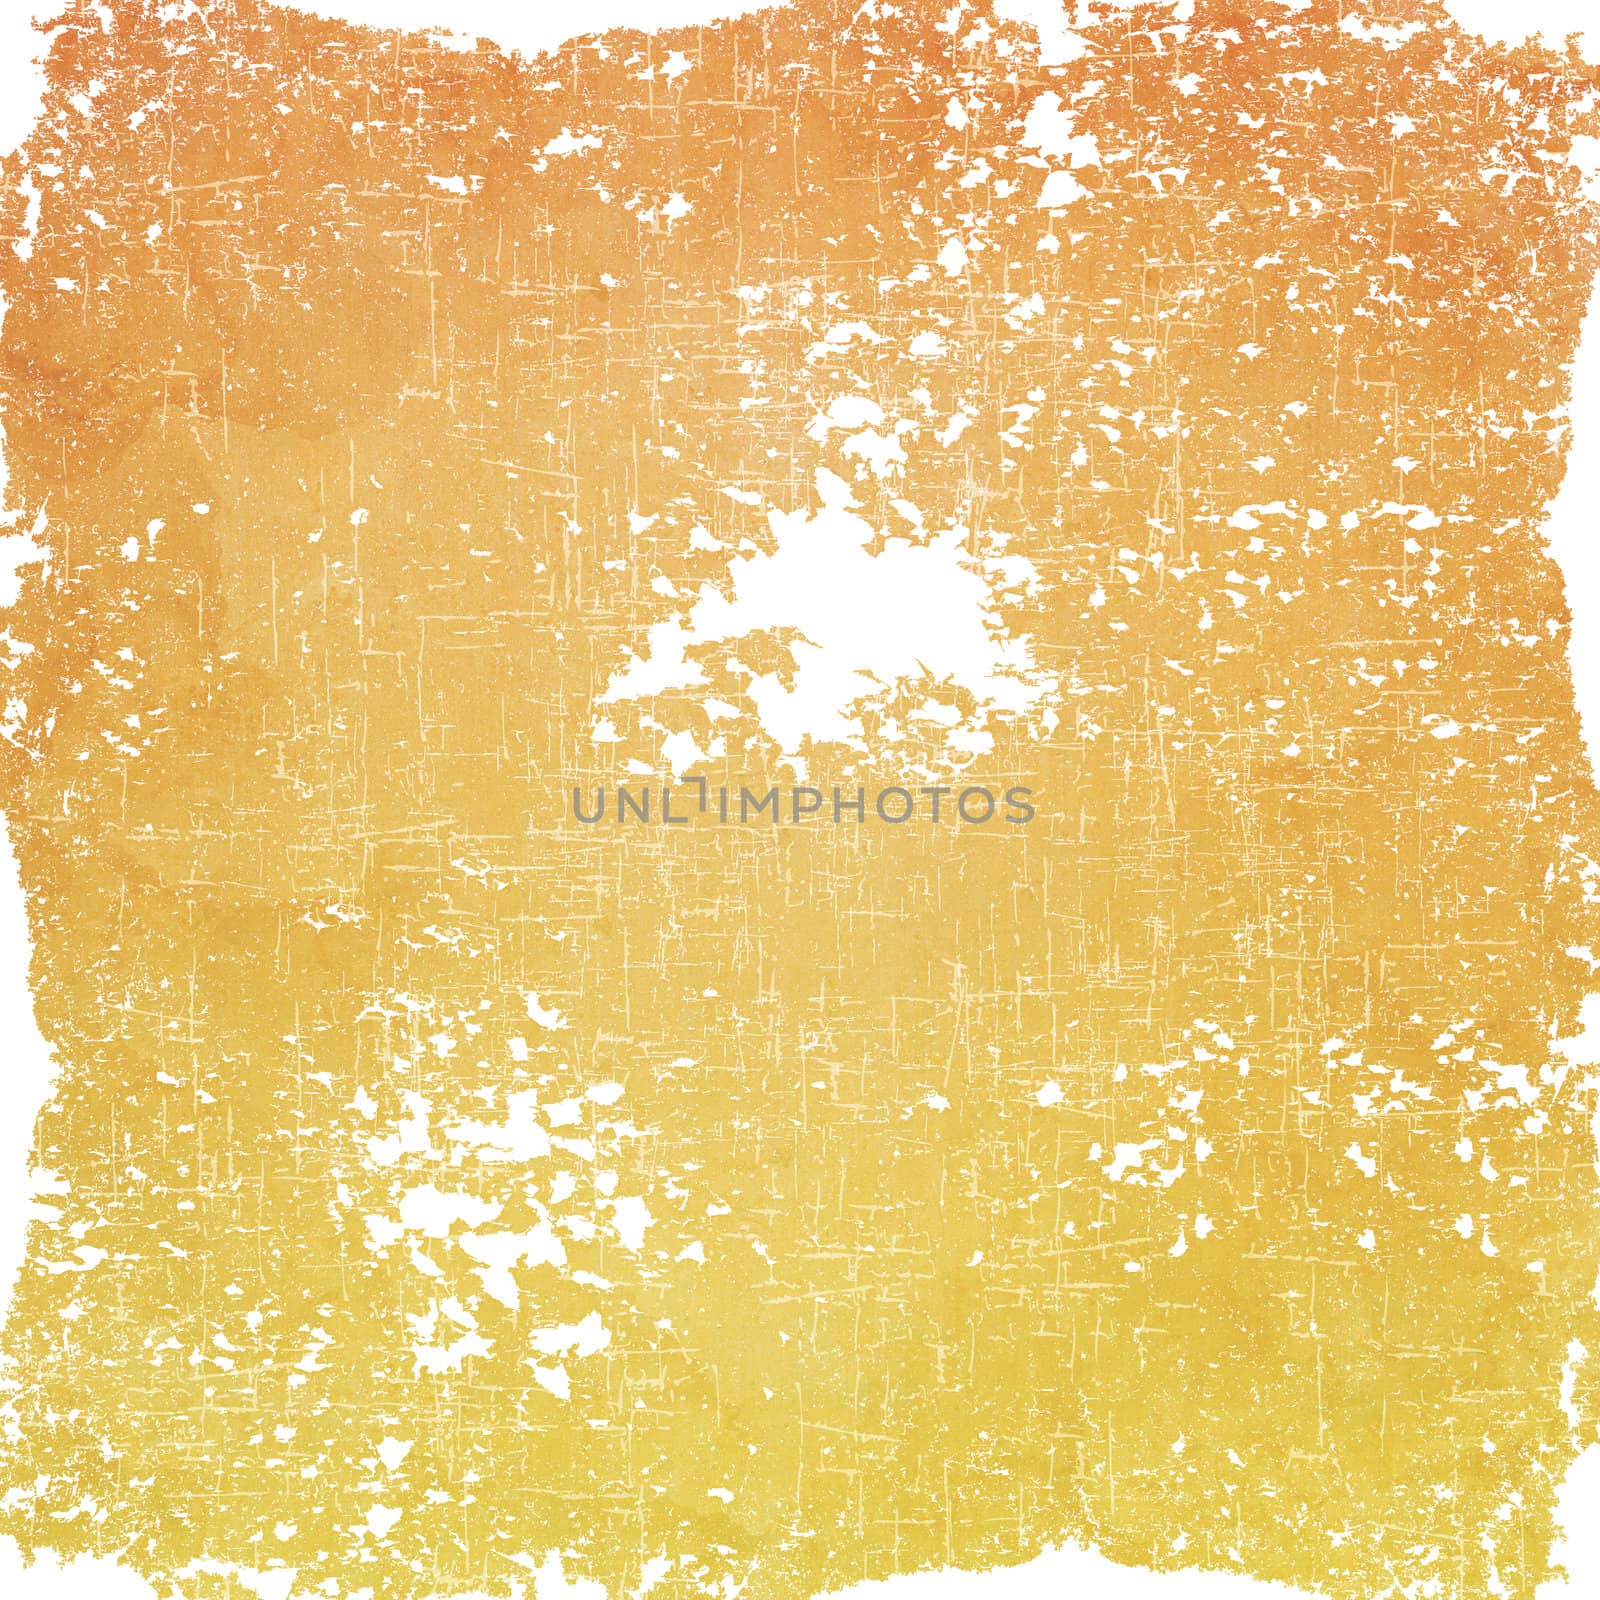 Grunge paper texture and background 